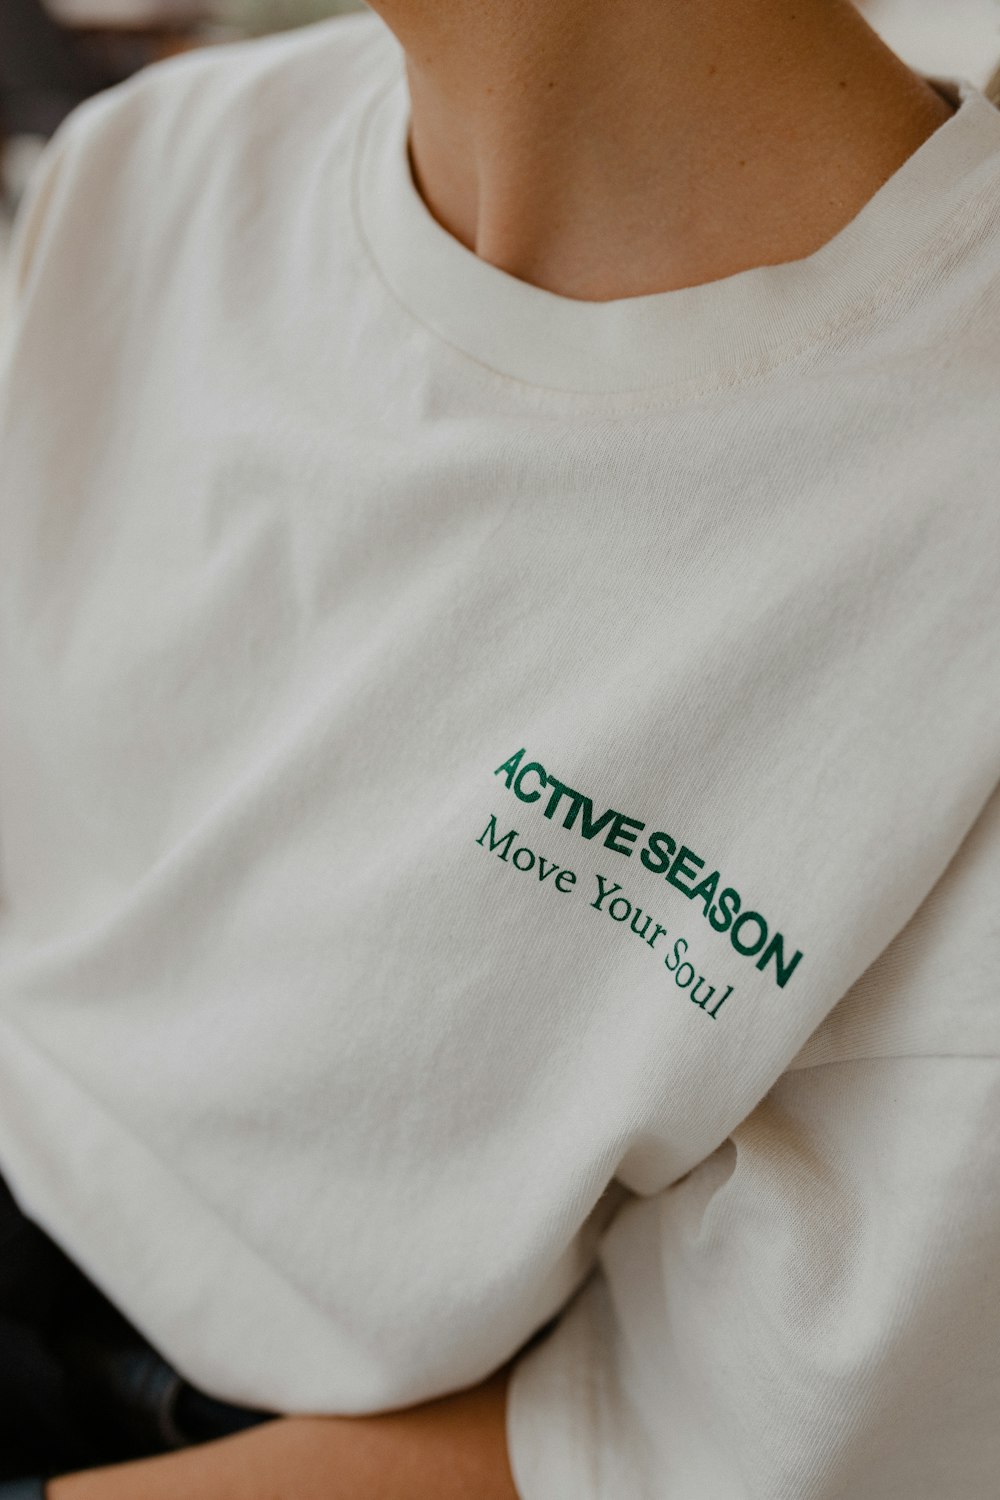 a person wearing a white shirt with green text on it